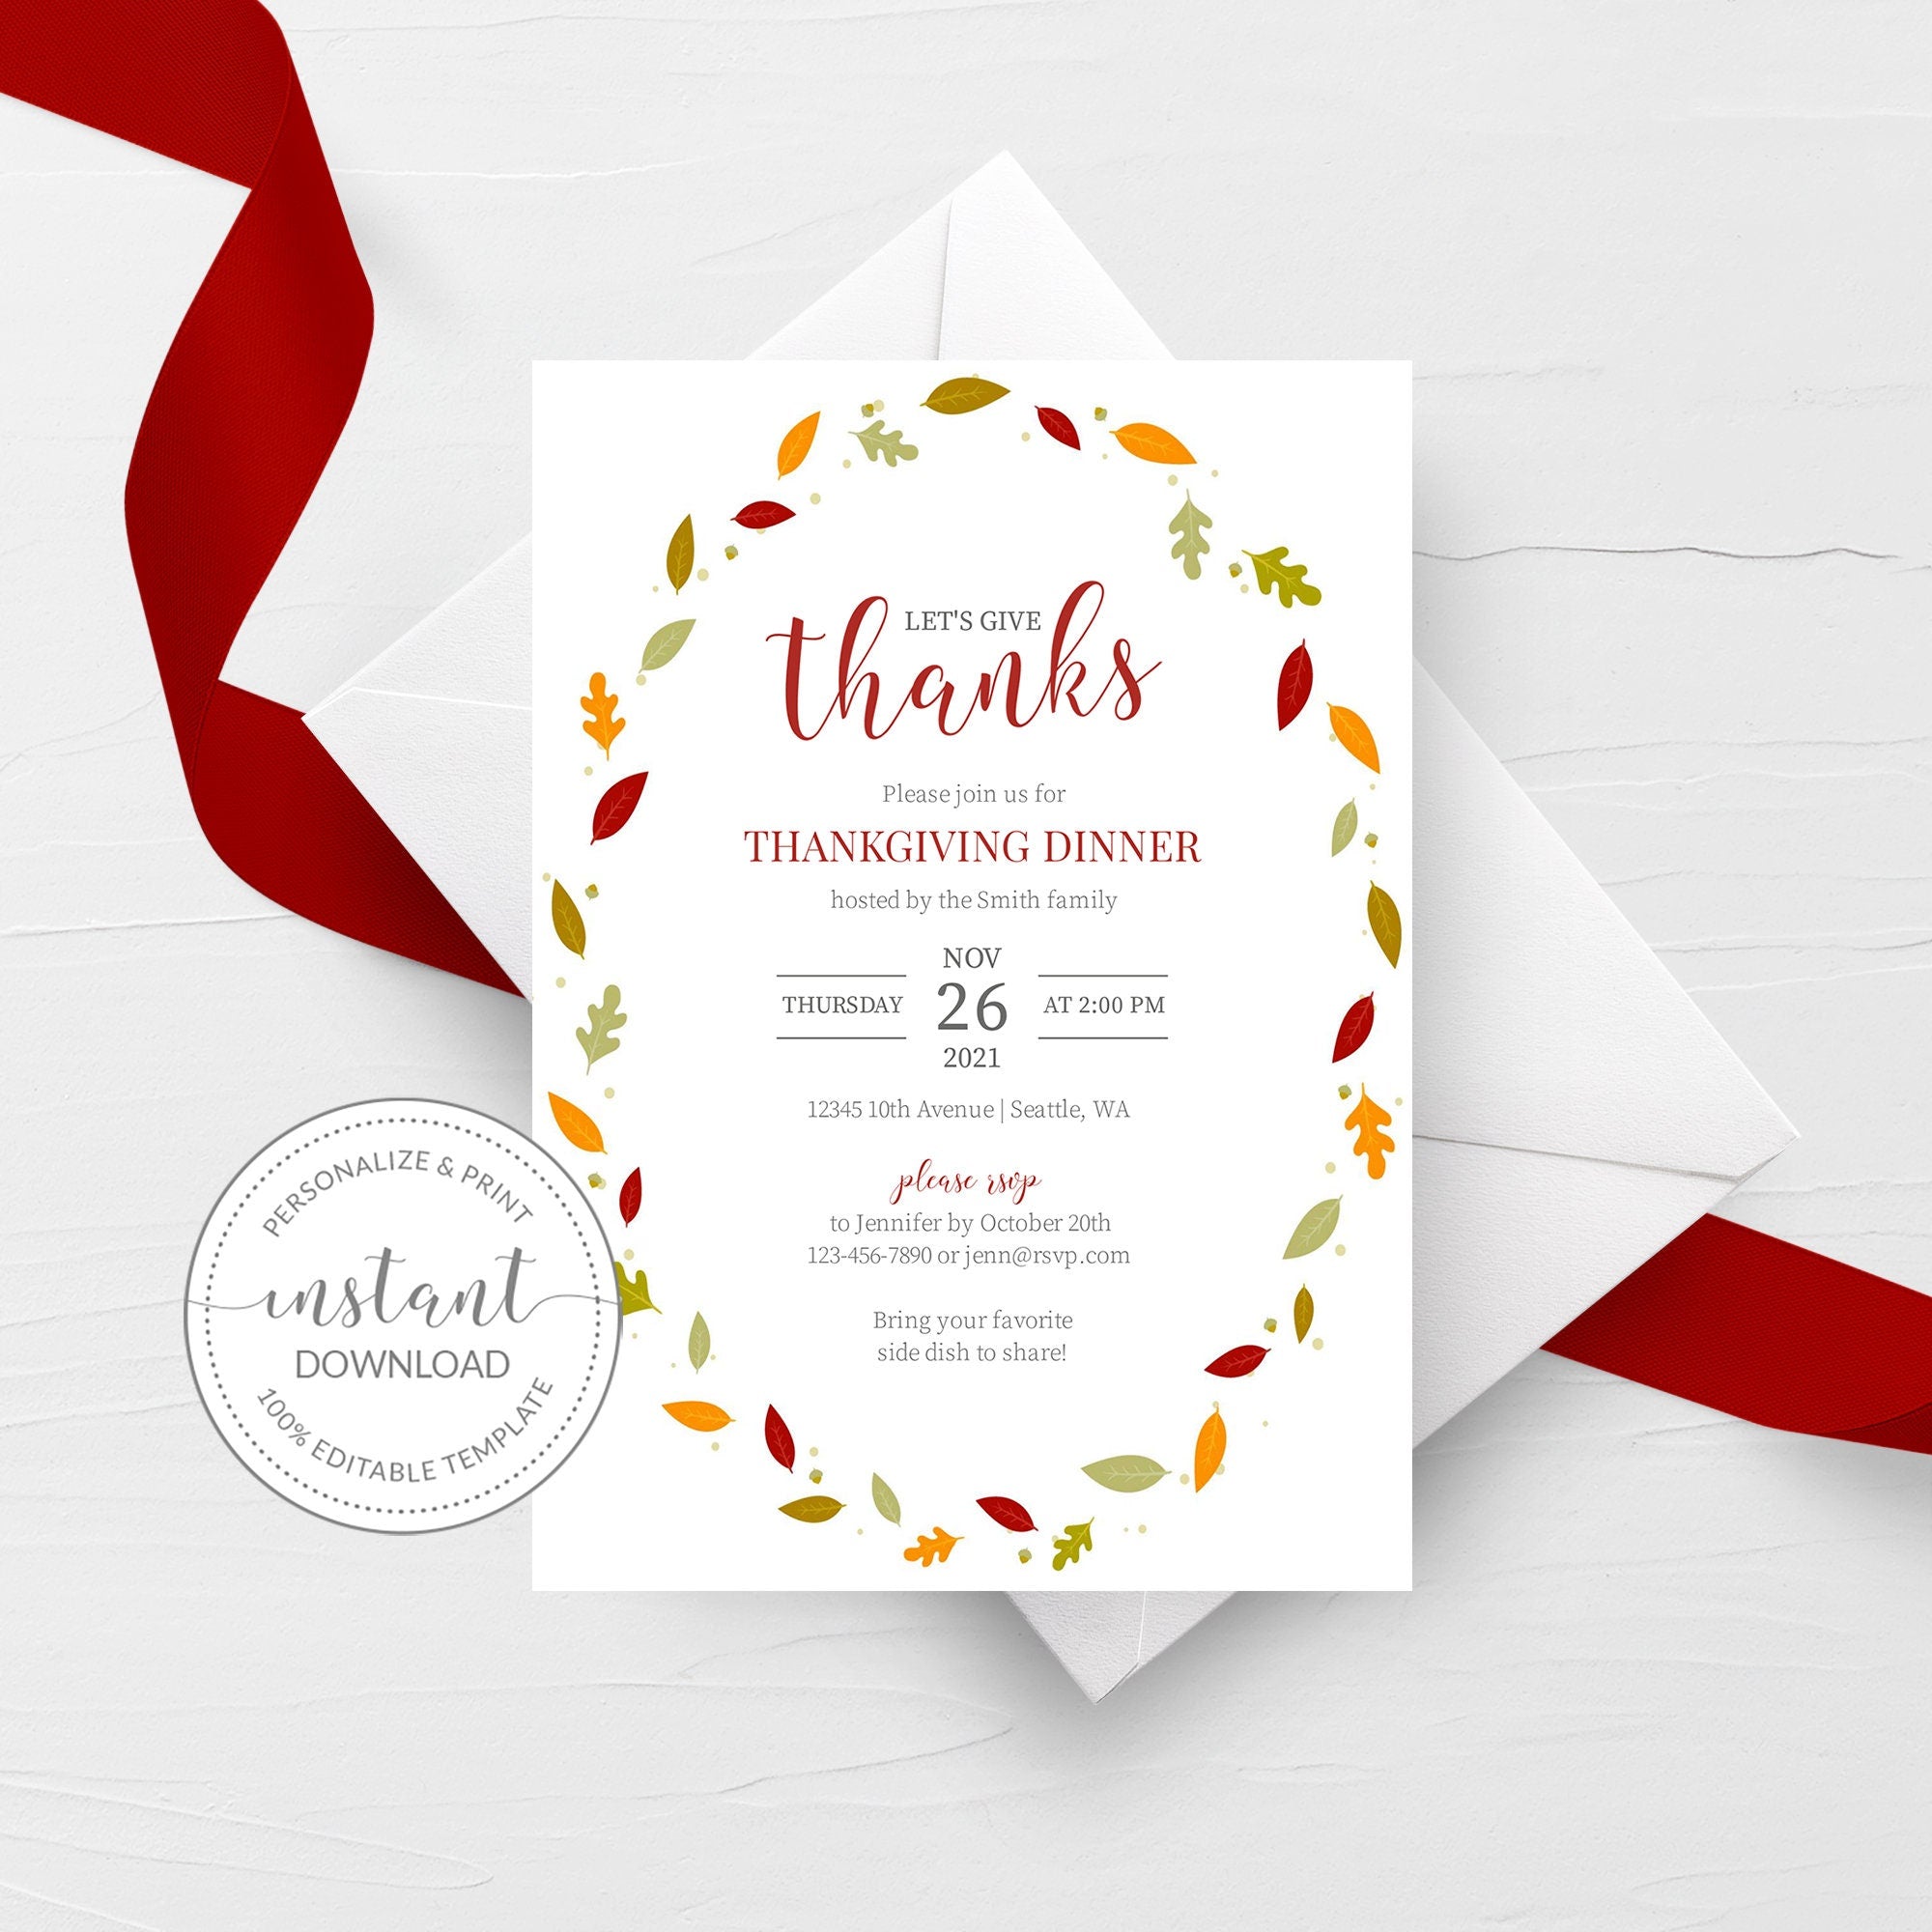 Thanksgiving Invitation Template, Give Thanks, Printable Thanksgiving Dinner Invitation, Thanksgiving Party Invite, INSTANT DOWNLOAD FL100